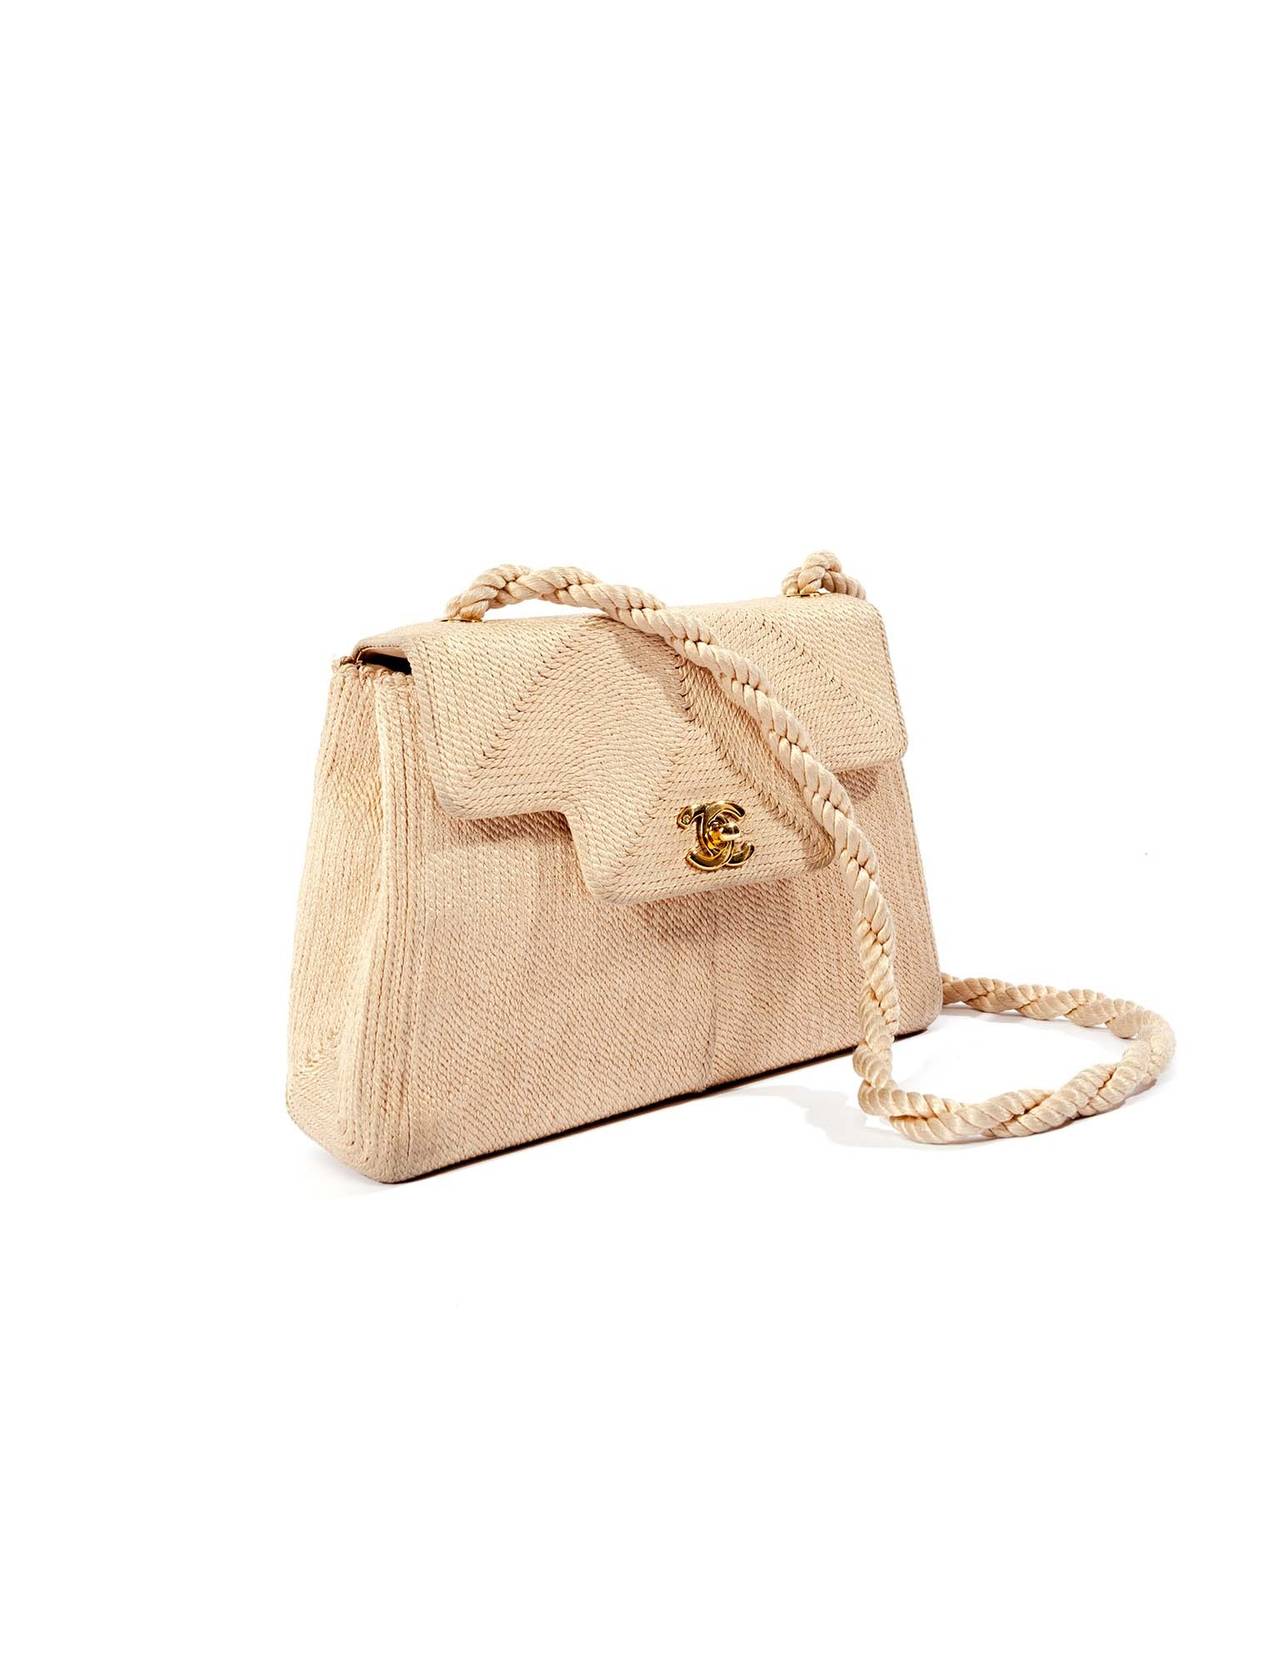 Chanel Vintage beige rope purse with gold logo double CC closure. Bag has rope straps with incredible rope chevroned details on front and back, fully lined in beige leather with small pocket and chanel logo stamped in gold. A true rare piece from